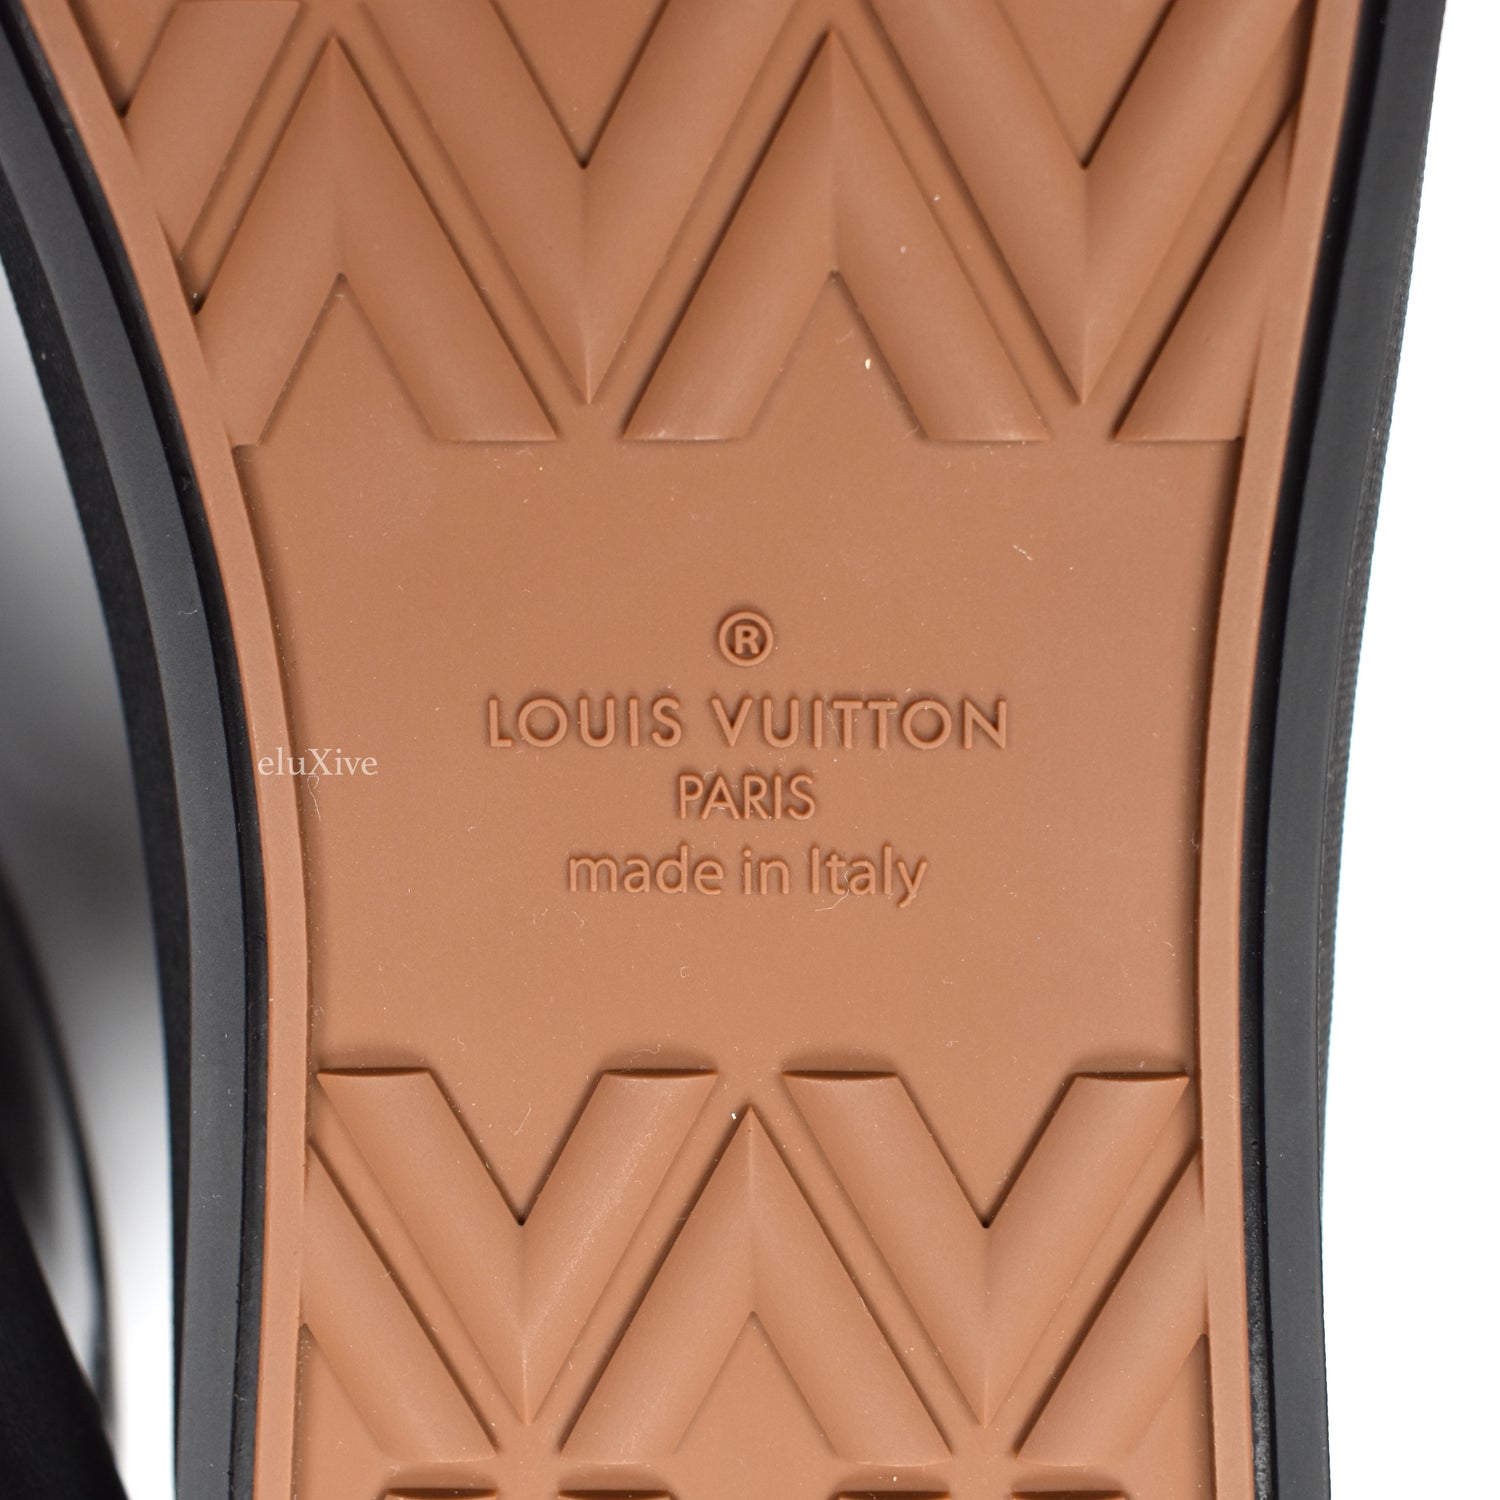 Buy Louis Vuitton Trocadero Shoes: New Releases & Iconic Styles